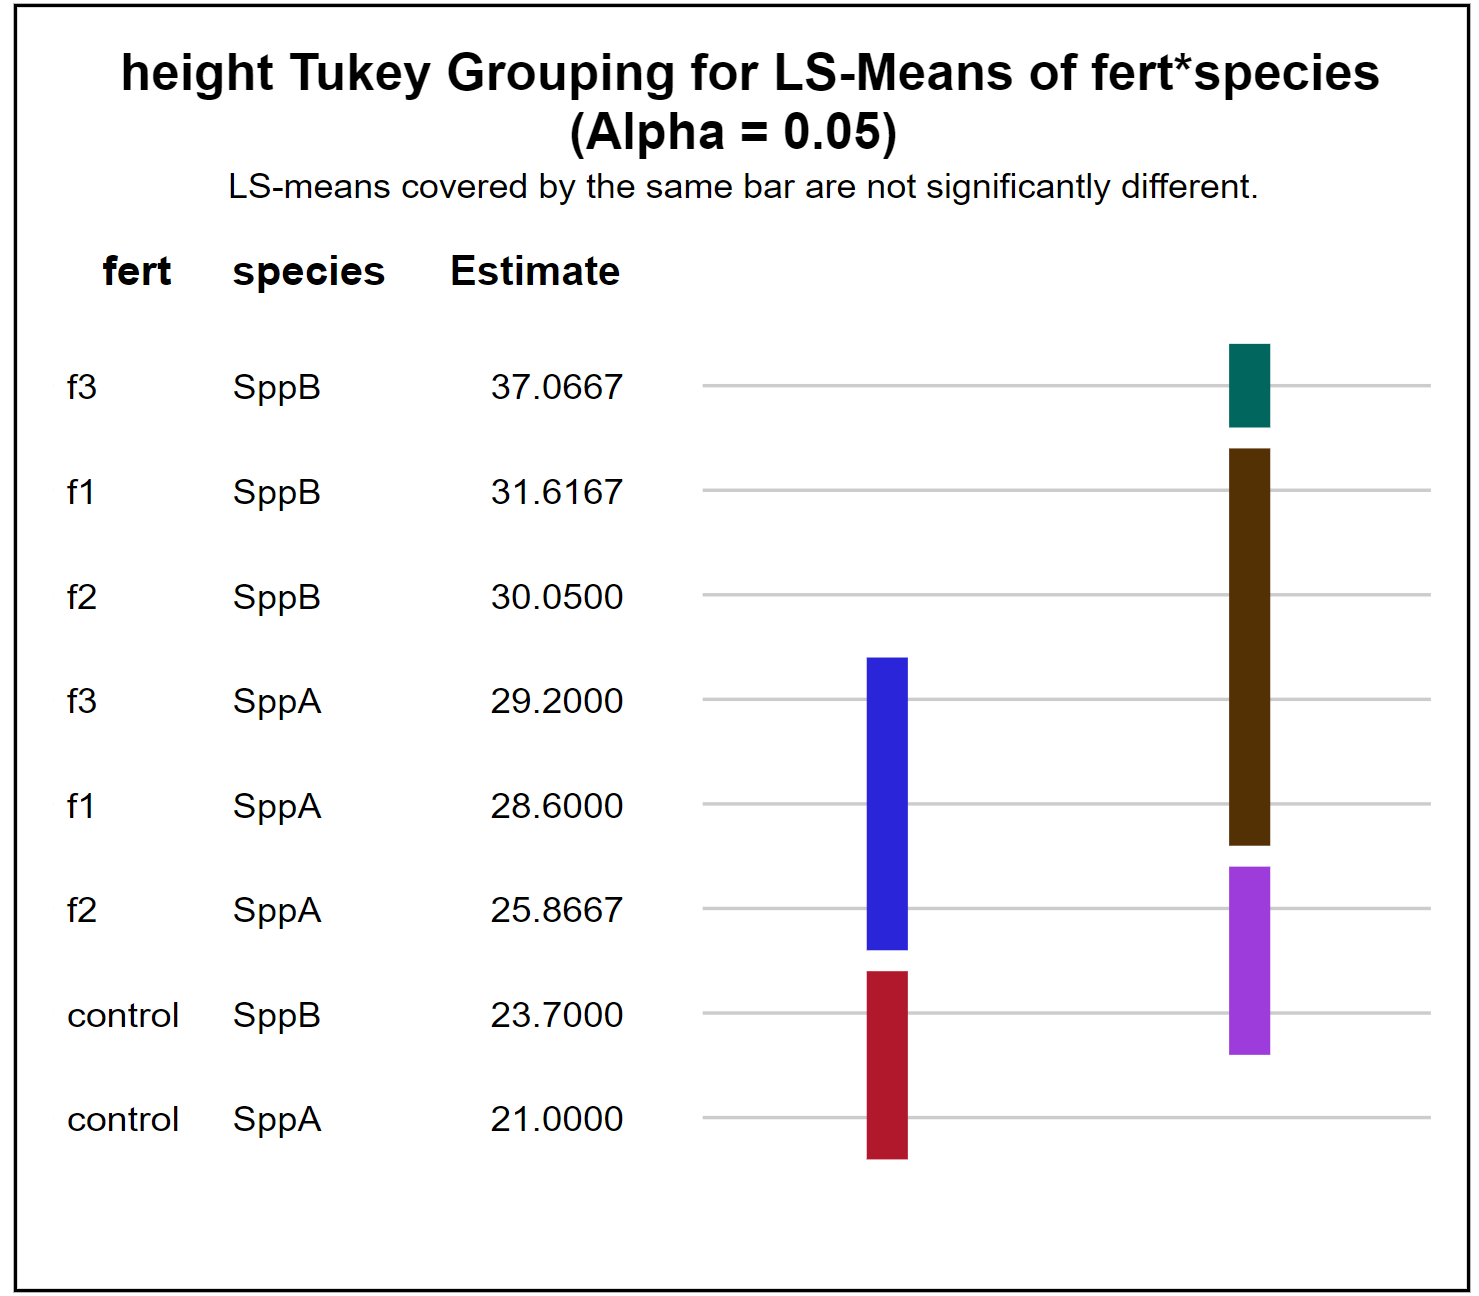 Height Tukey grouping for LS-means of fert*species. f3 species B is covered by a green bar. f1 species B, f2 species B, f3 species A, and f1 species A are covered by a single brown bar. f2 species A and control species B are covered by a single purple bar. f3 species A, f1 species A, and f2 species A are covered by a single blue bar. Control species B and control species A are covered by a single red bar.